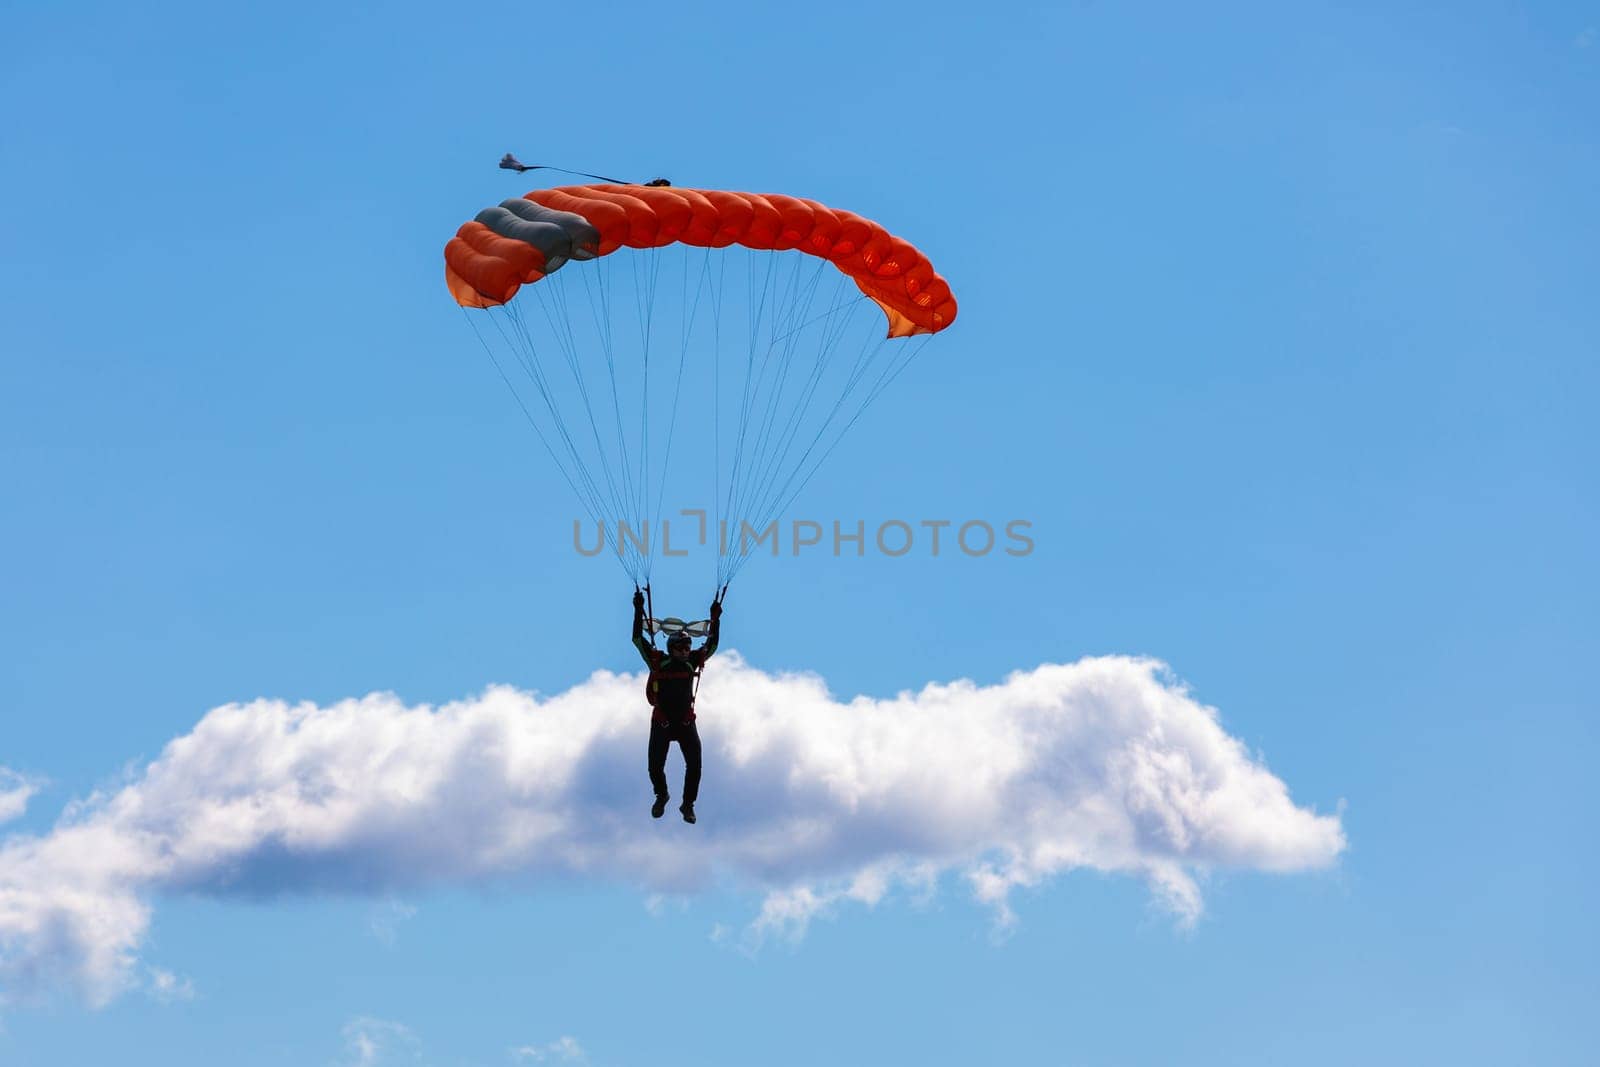 Parachute in the sky. Skydiver is flying a parachute in the blue sky by Yurich32